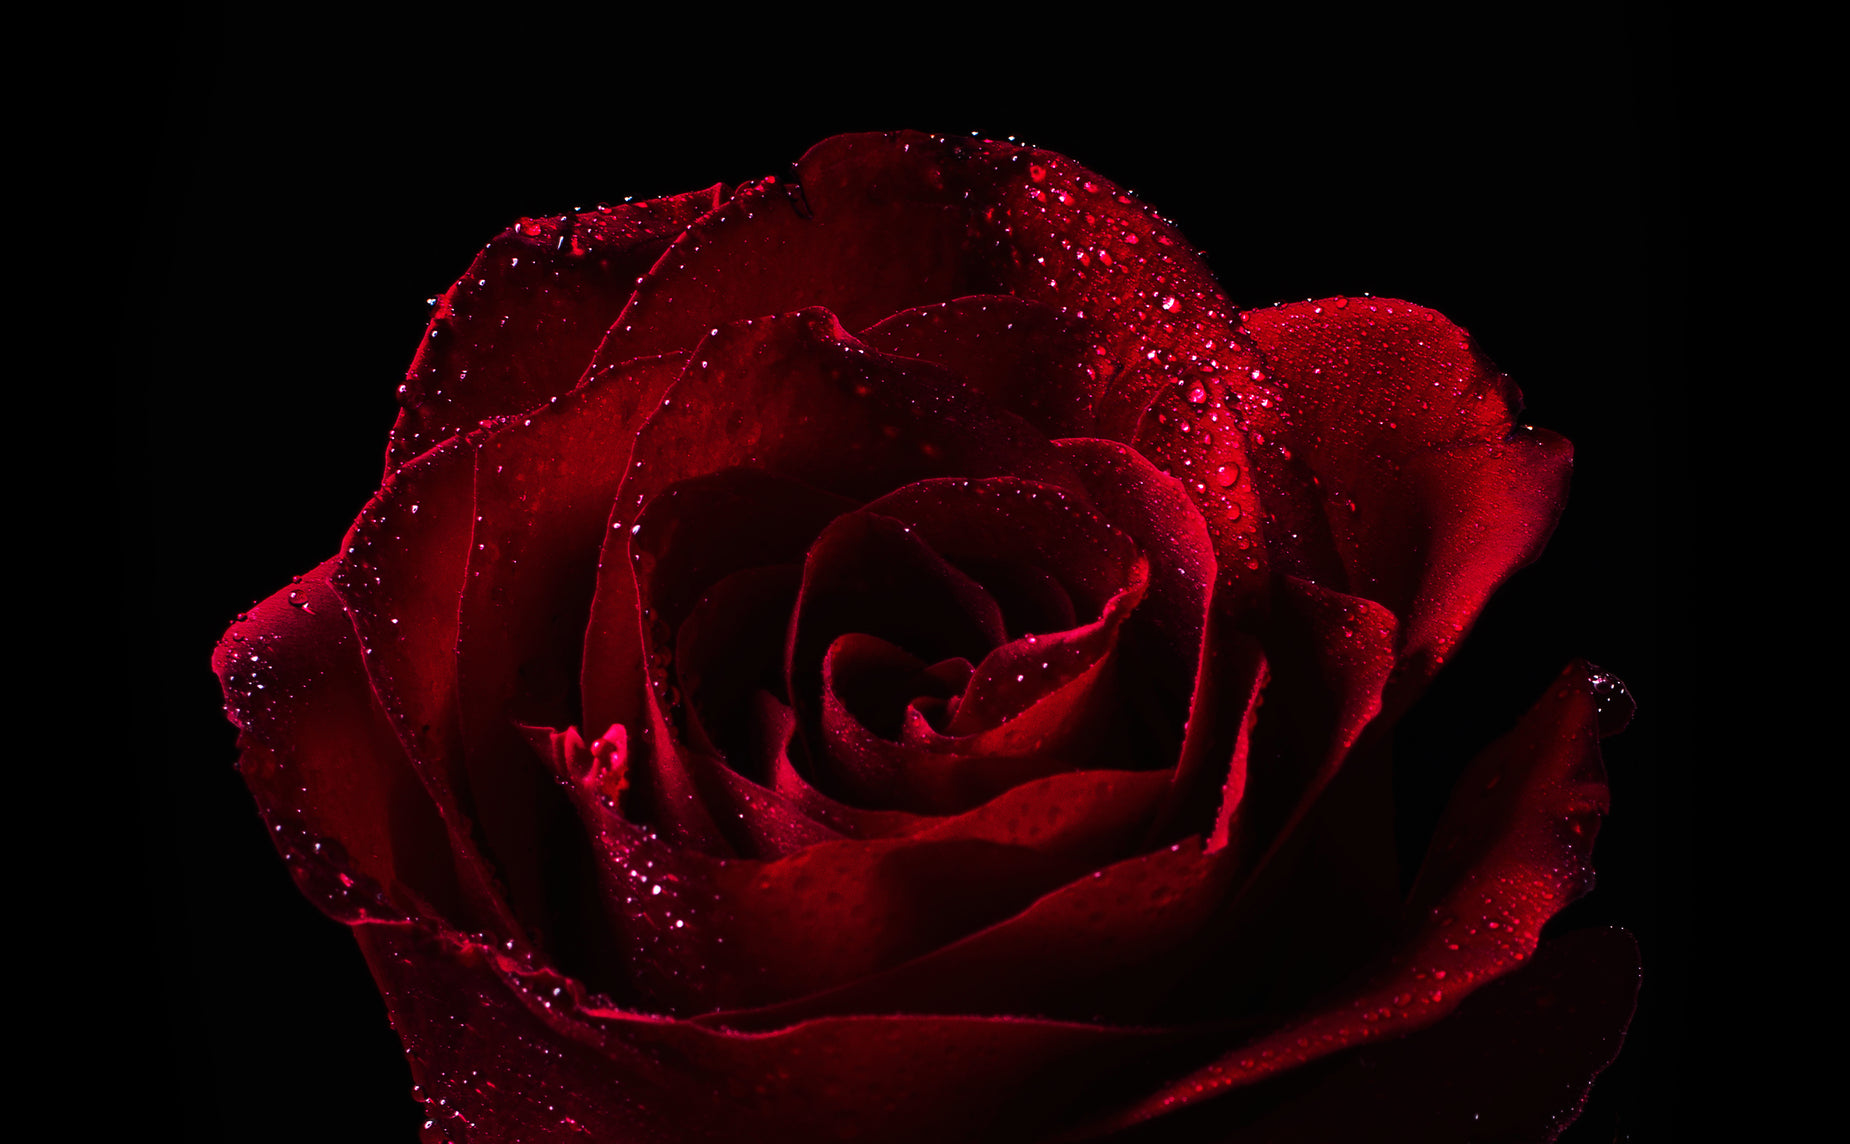 a very bright red rose with water drops on it